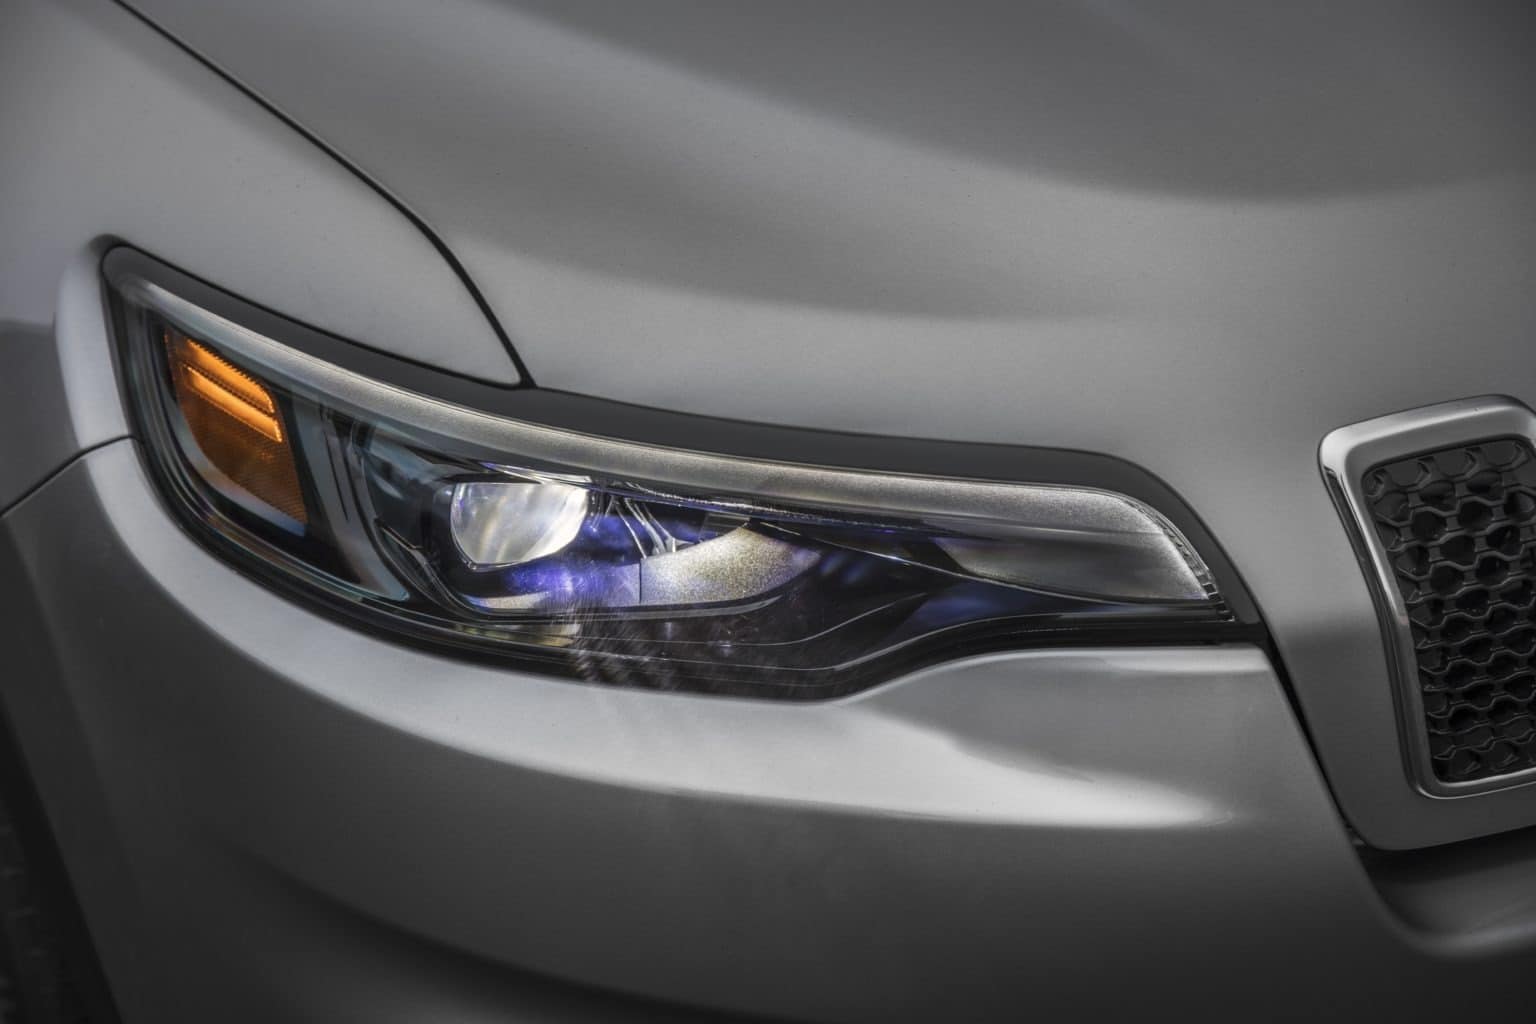 Close up details of the headlights of the 2022 Jeep Cherokee.